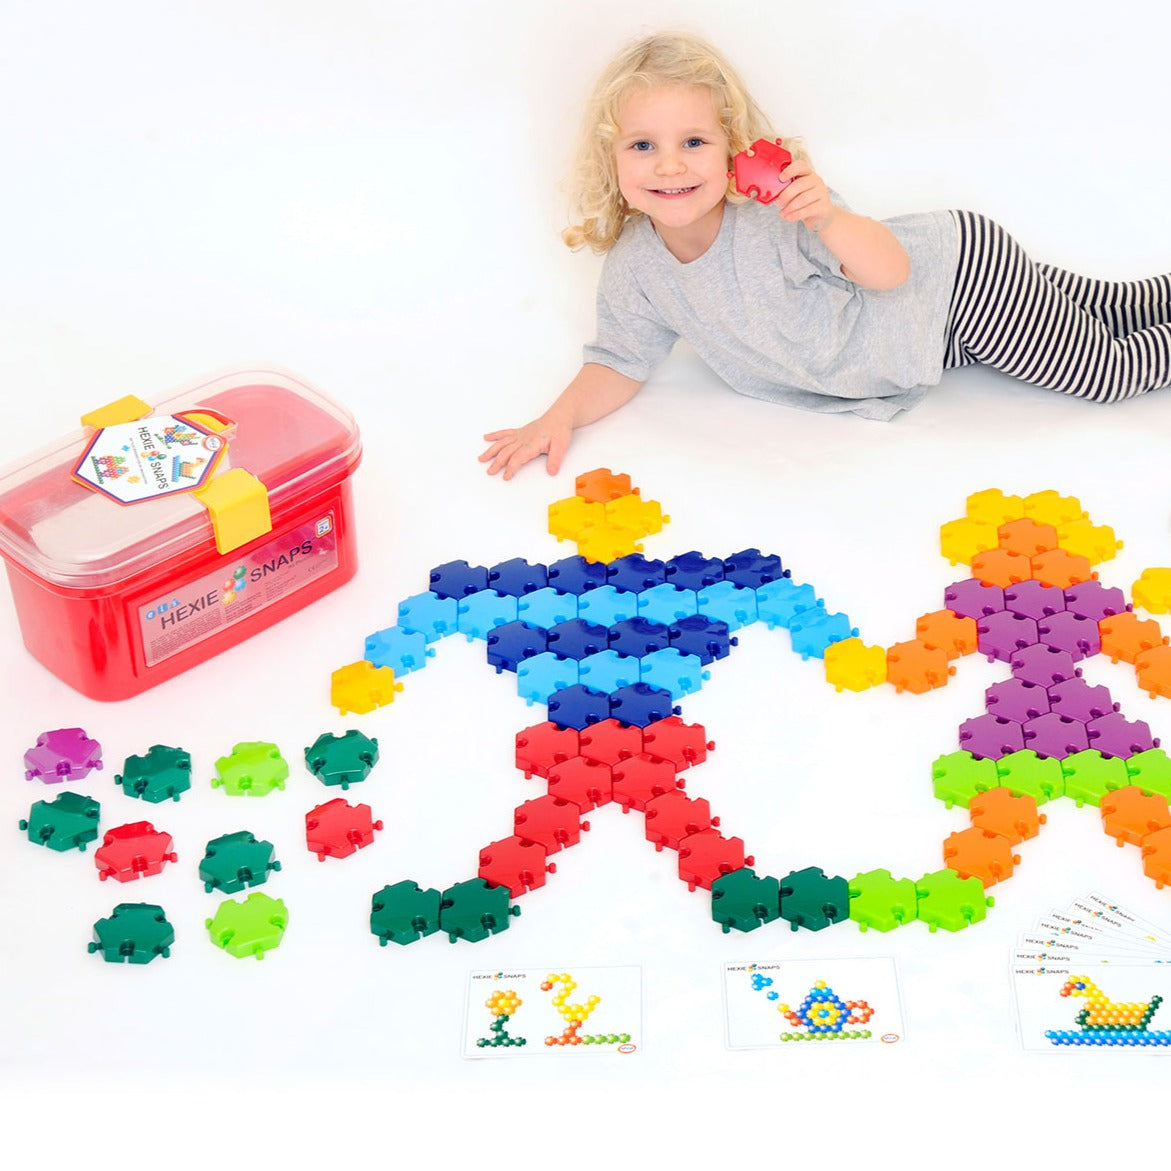 Hexie-Snaps, Hexie Snaps are the perfect toy for children who love to create. With their bright colours and hexagonal shapes, children can easily slot the pieces together to form 2D patterns and pictures. Measuring 7cm in diameter, these pieces are a great size for little hands to hold and manipulate. Hexie-Snaps are designed for children aged 2 years and up, Hexie Snaps are not only fun, but also help to develop important skills such as hand-eye coordination, fine motor skills and creative thinking. Childr